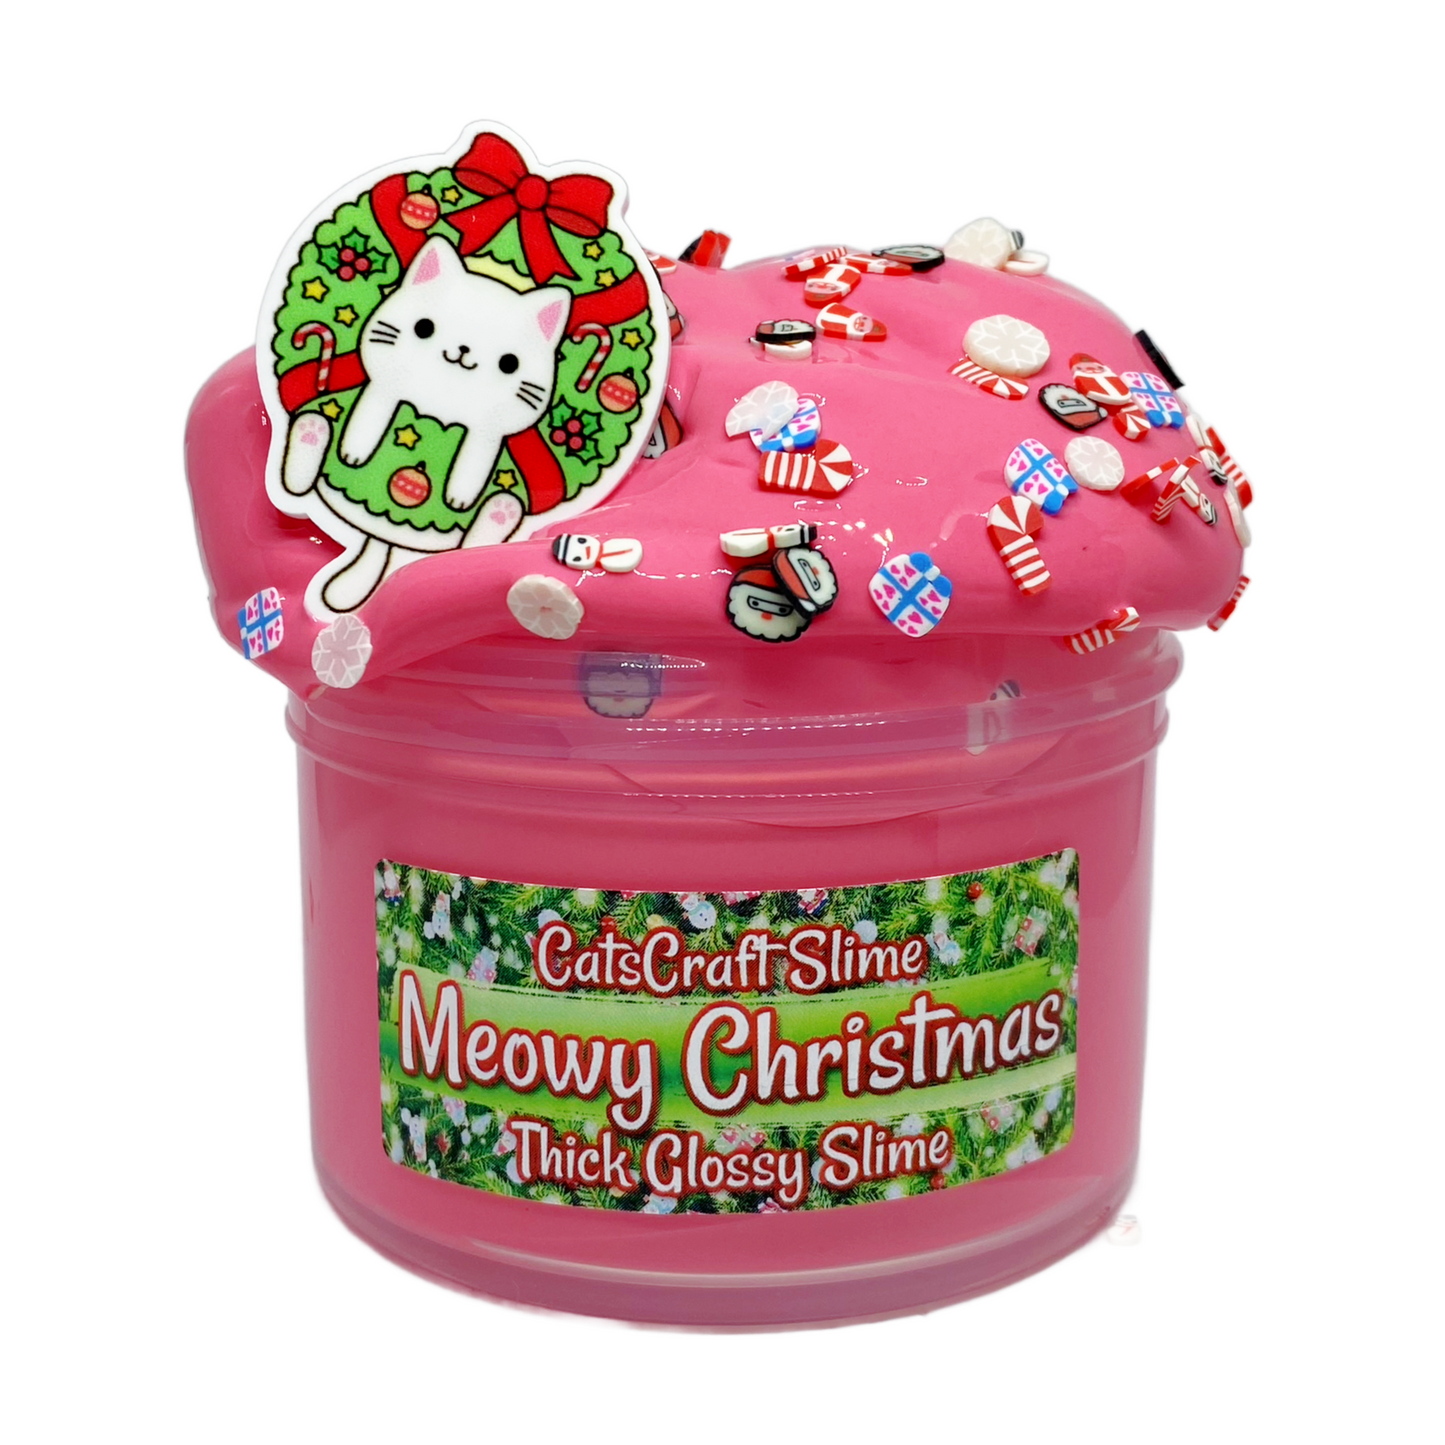 Thick Glossy Slime "Meowy Christmas" SCENTED ASMR Cat Charm & sprinkles